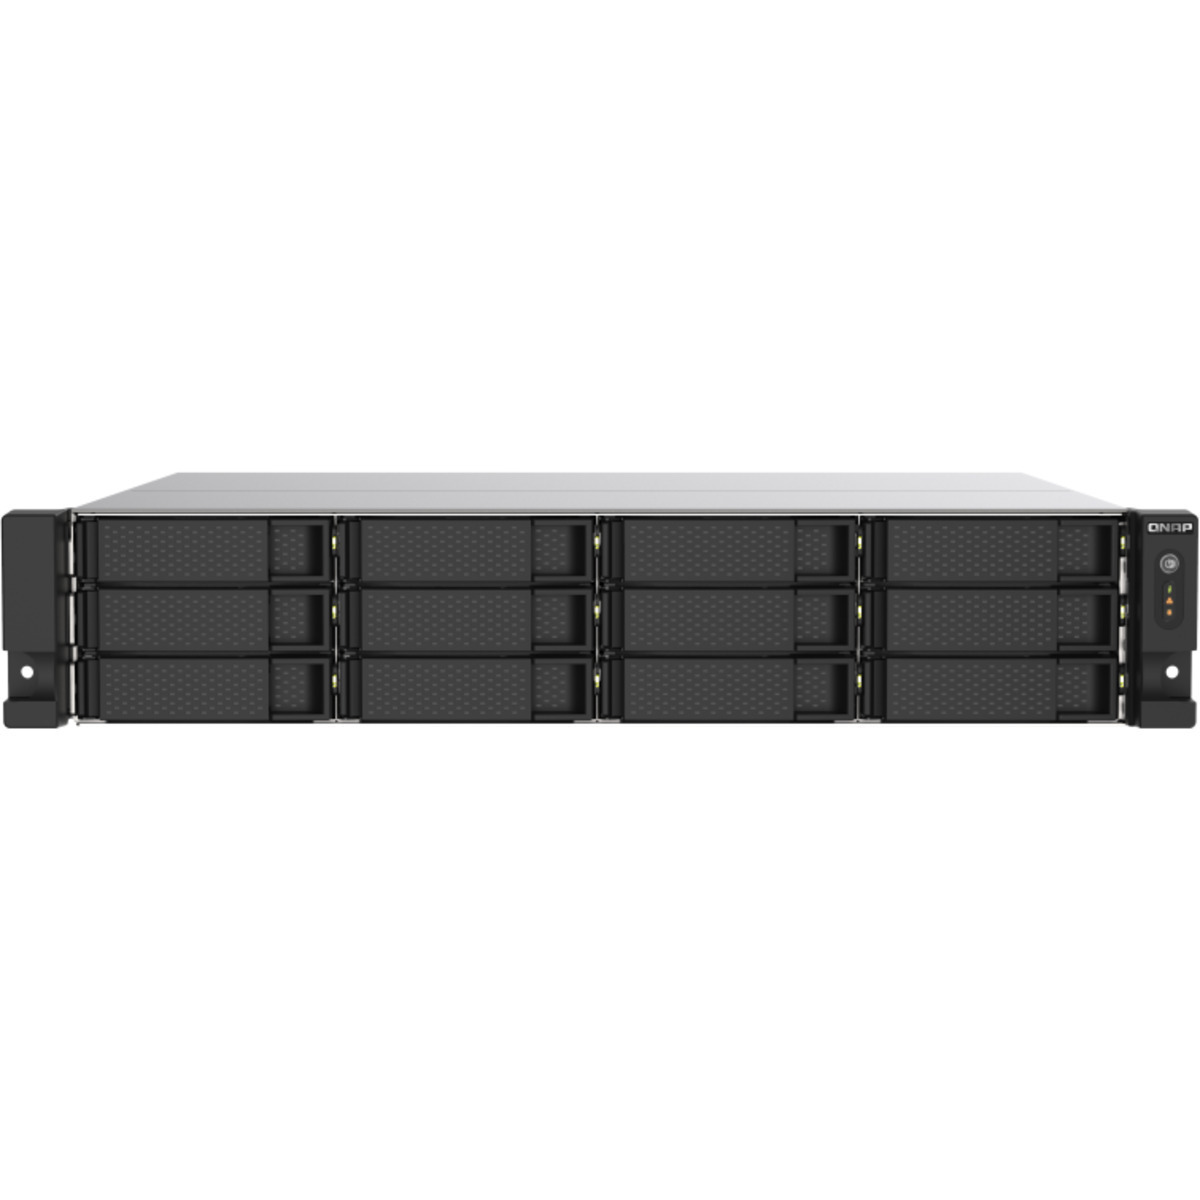 QNAP TS-1273AU-RP 12tb 12-Bay RackMount Multimedia / Power User / Business NAS - Network Attached Storage Device 12x1tb Western Digital Red SA500 WDS100T1R0A 2.5 560/530MB/s SATA 6Gb/s SSD NAS Class Drives Installed - Burn-In Tested - FREE RAM UPGRADE TS-1273AU-RP